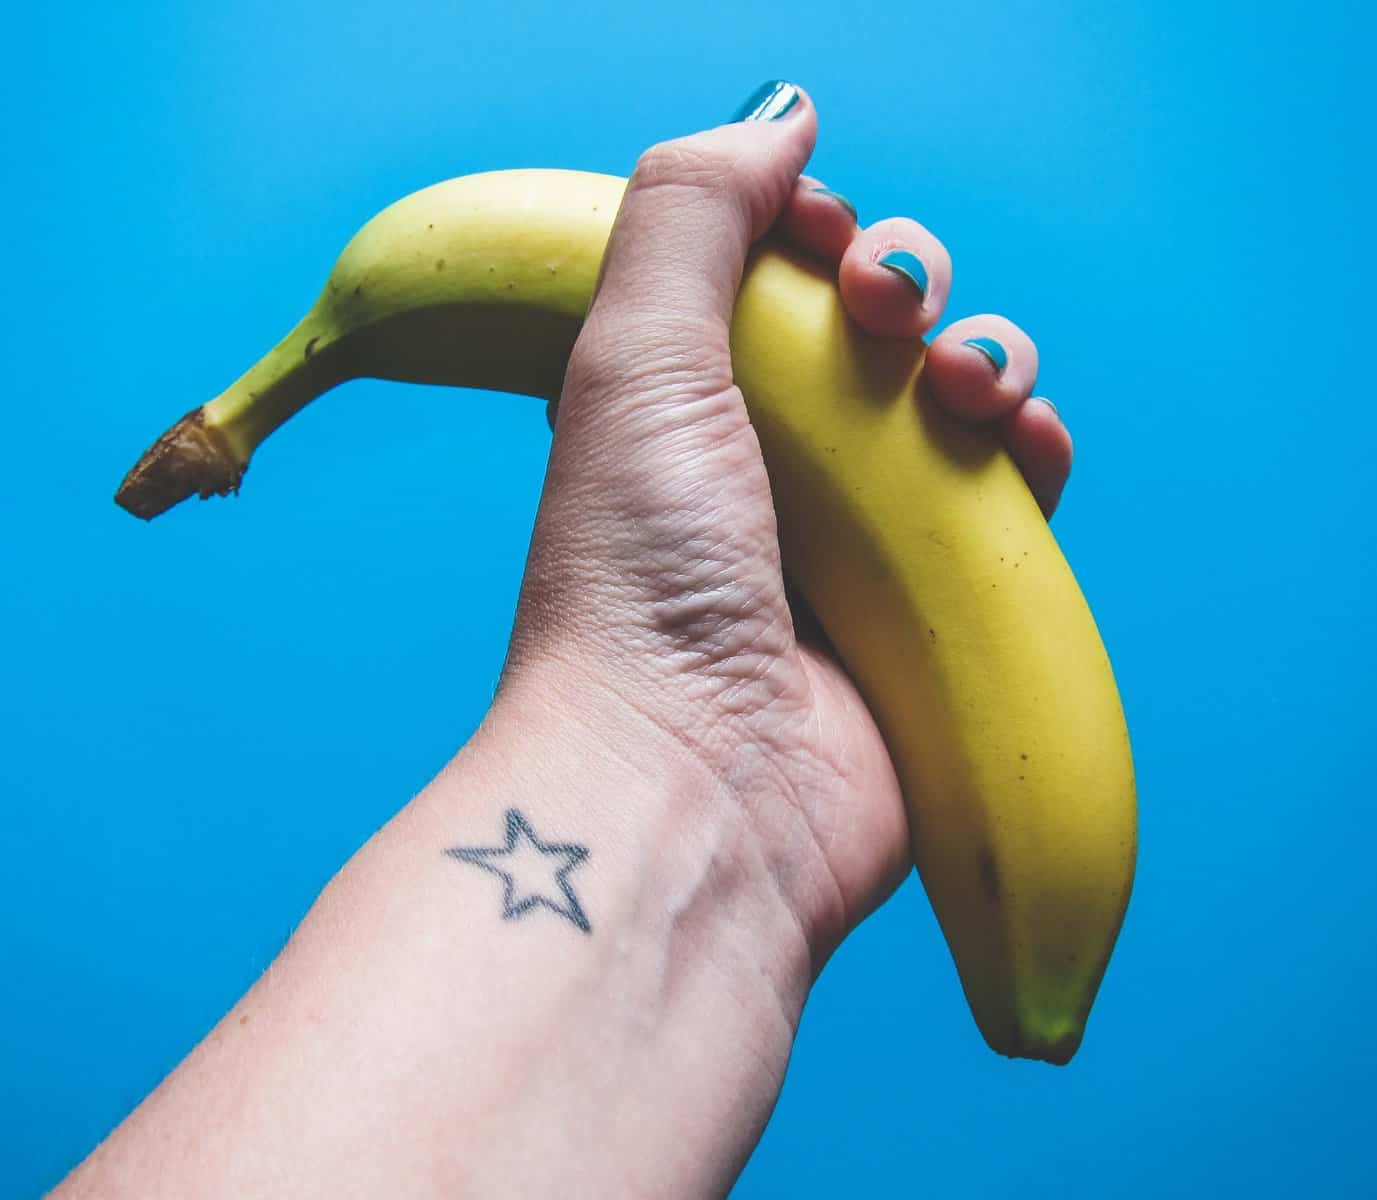 The Top Most Amazing Banana Beauty Tips and Benefits